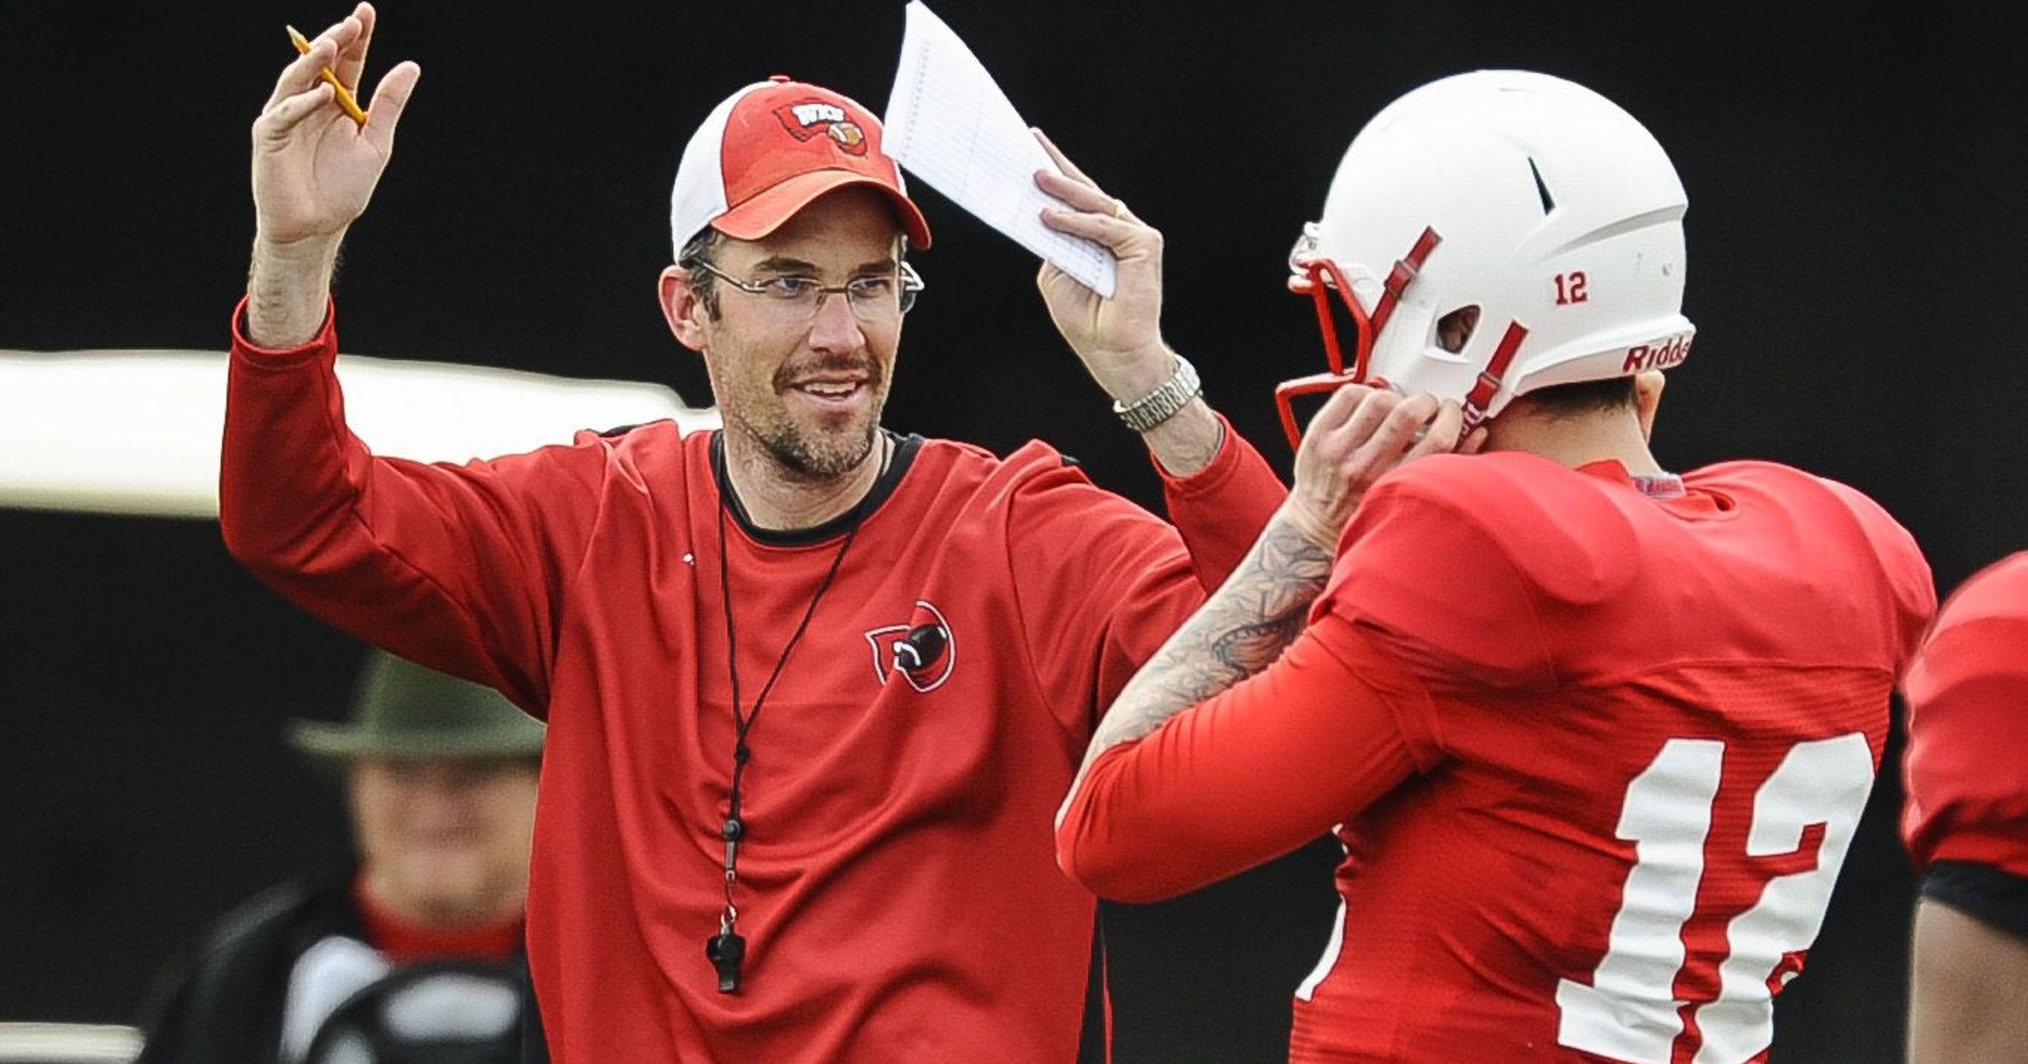 WKU's Helton joins roster of speakers for C-N Football Coaching Clinic